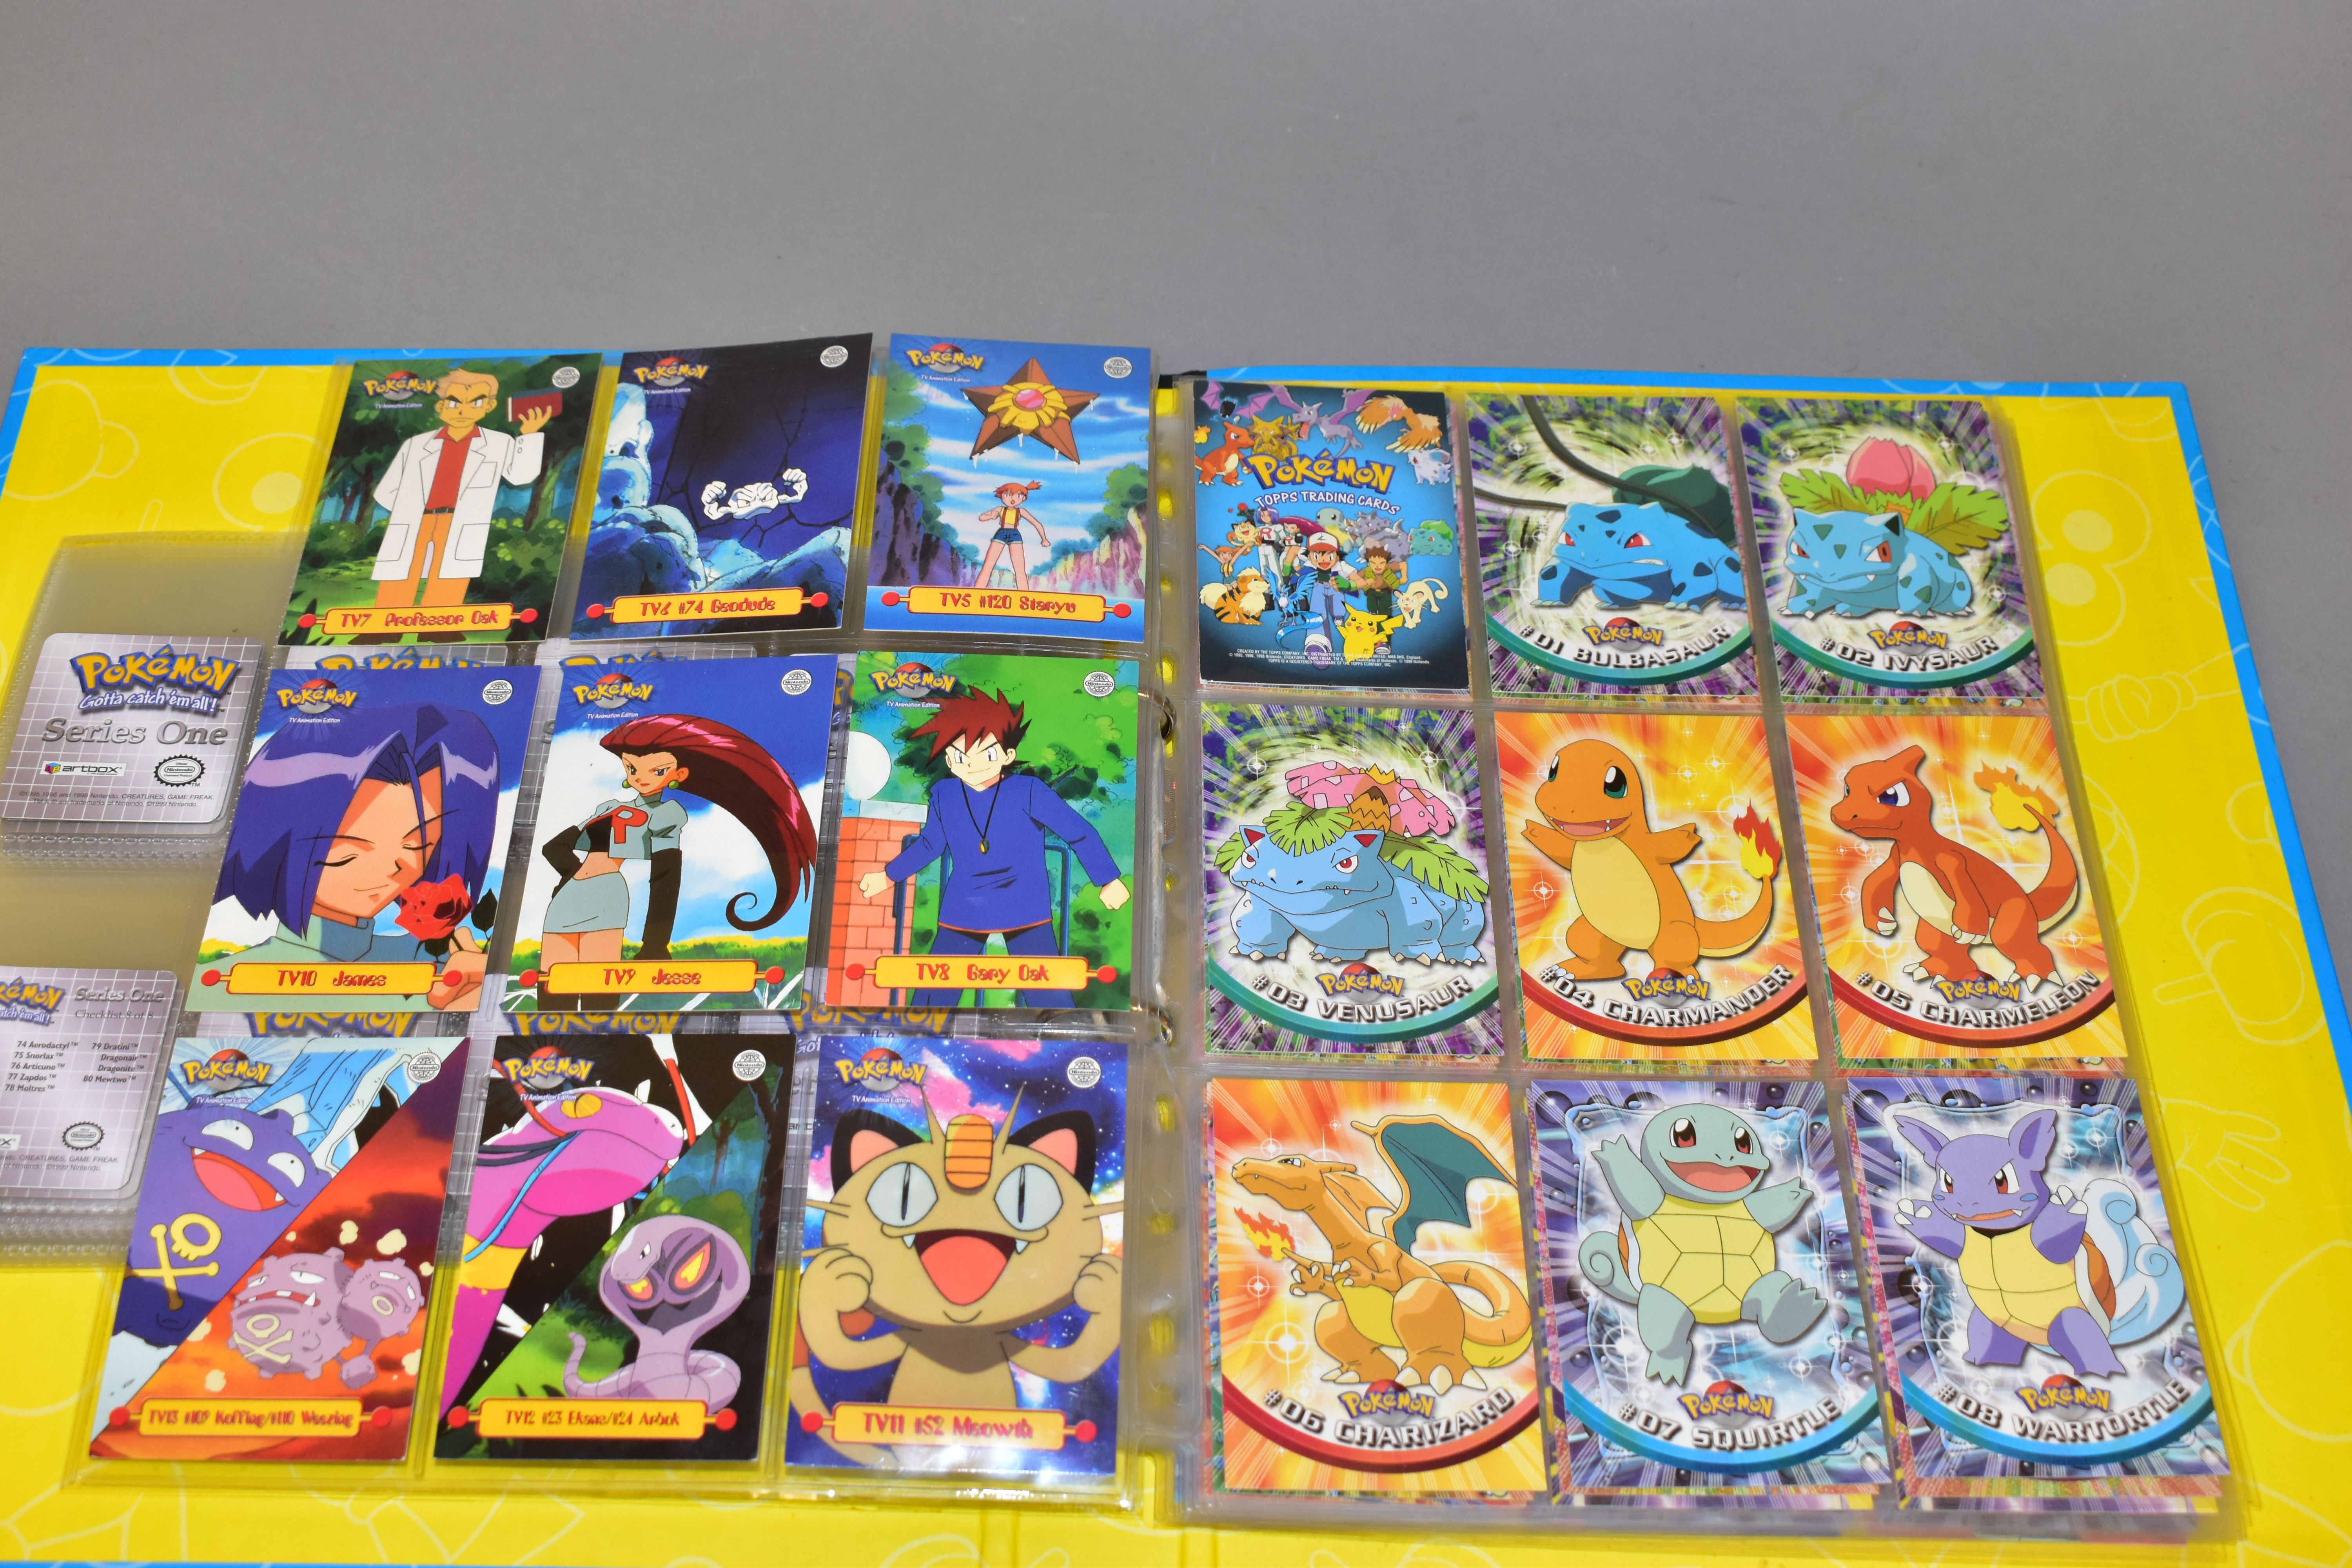 A COMPLETE SET OF THE TOPPS POKEMON TRADING CARDS SERIES 1, all 76 cards plus the 13 character cards - Image 12 of 20